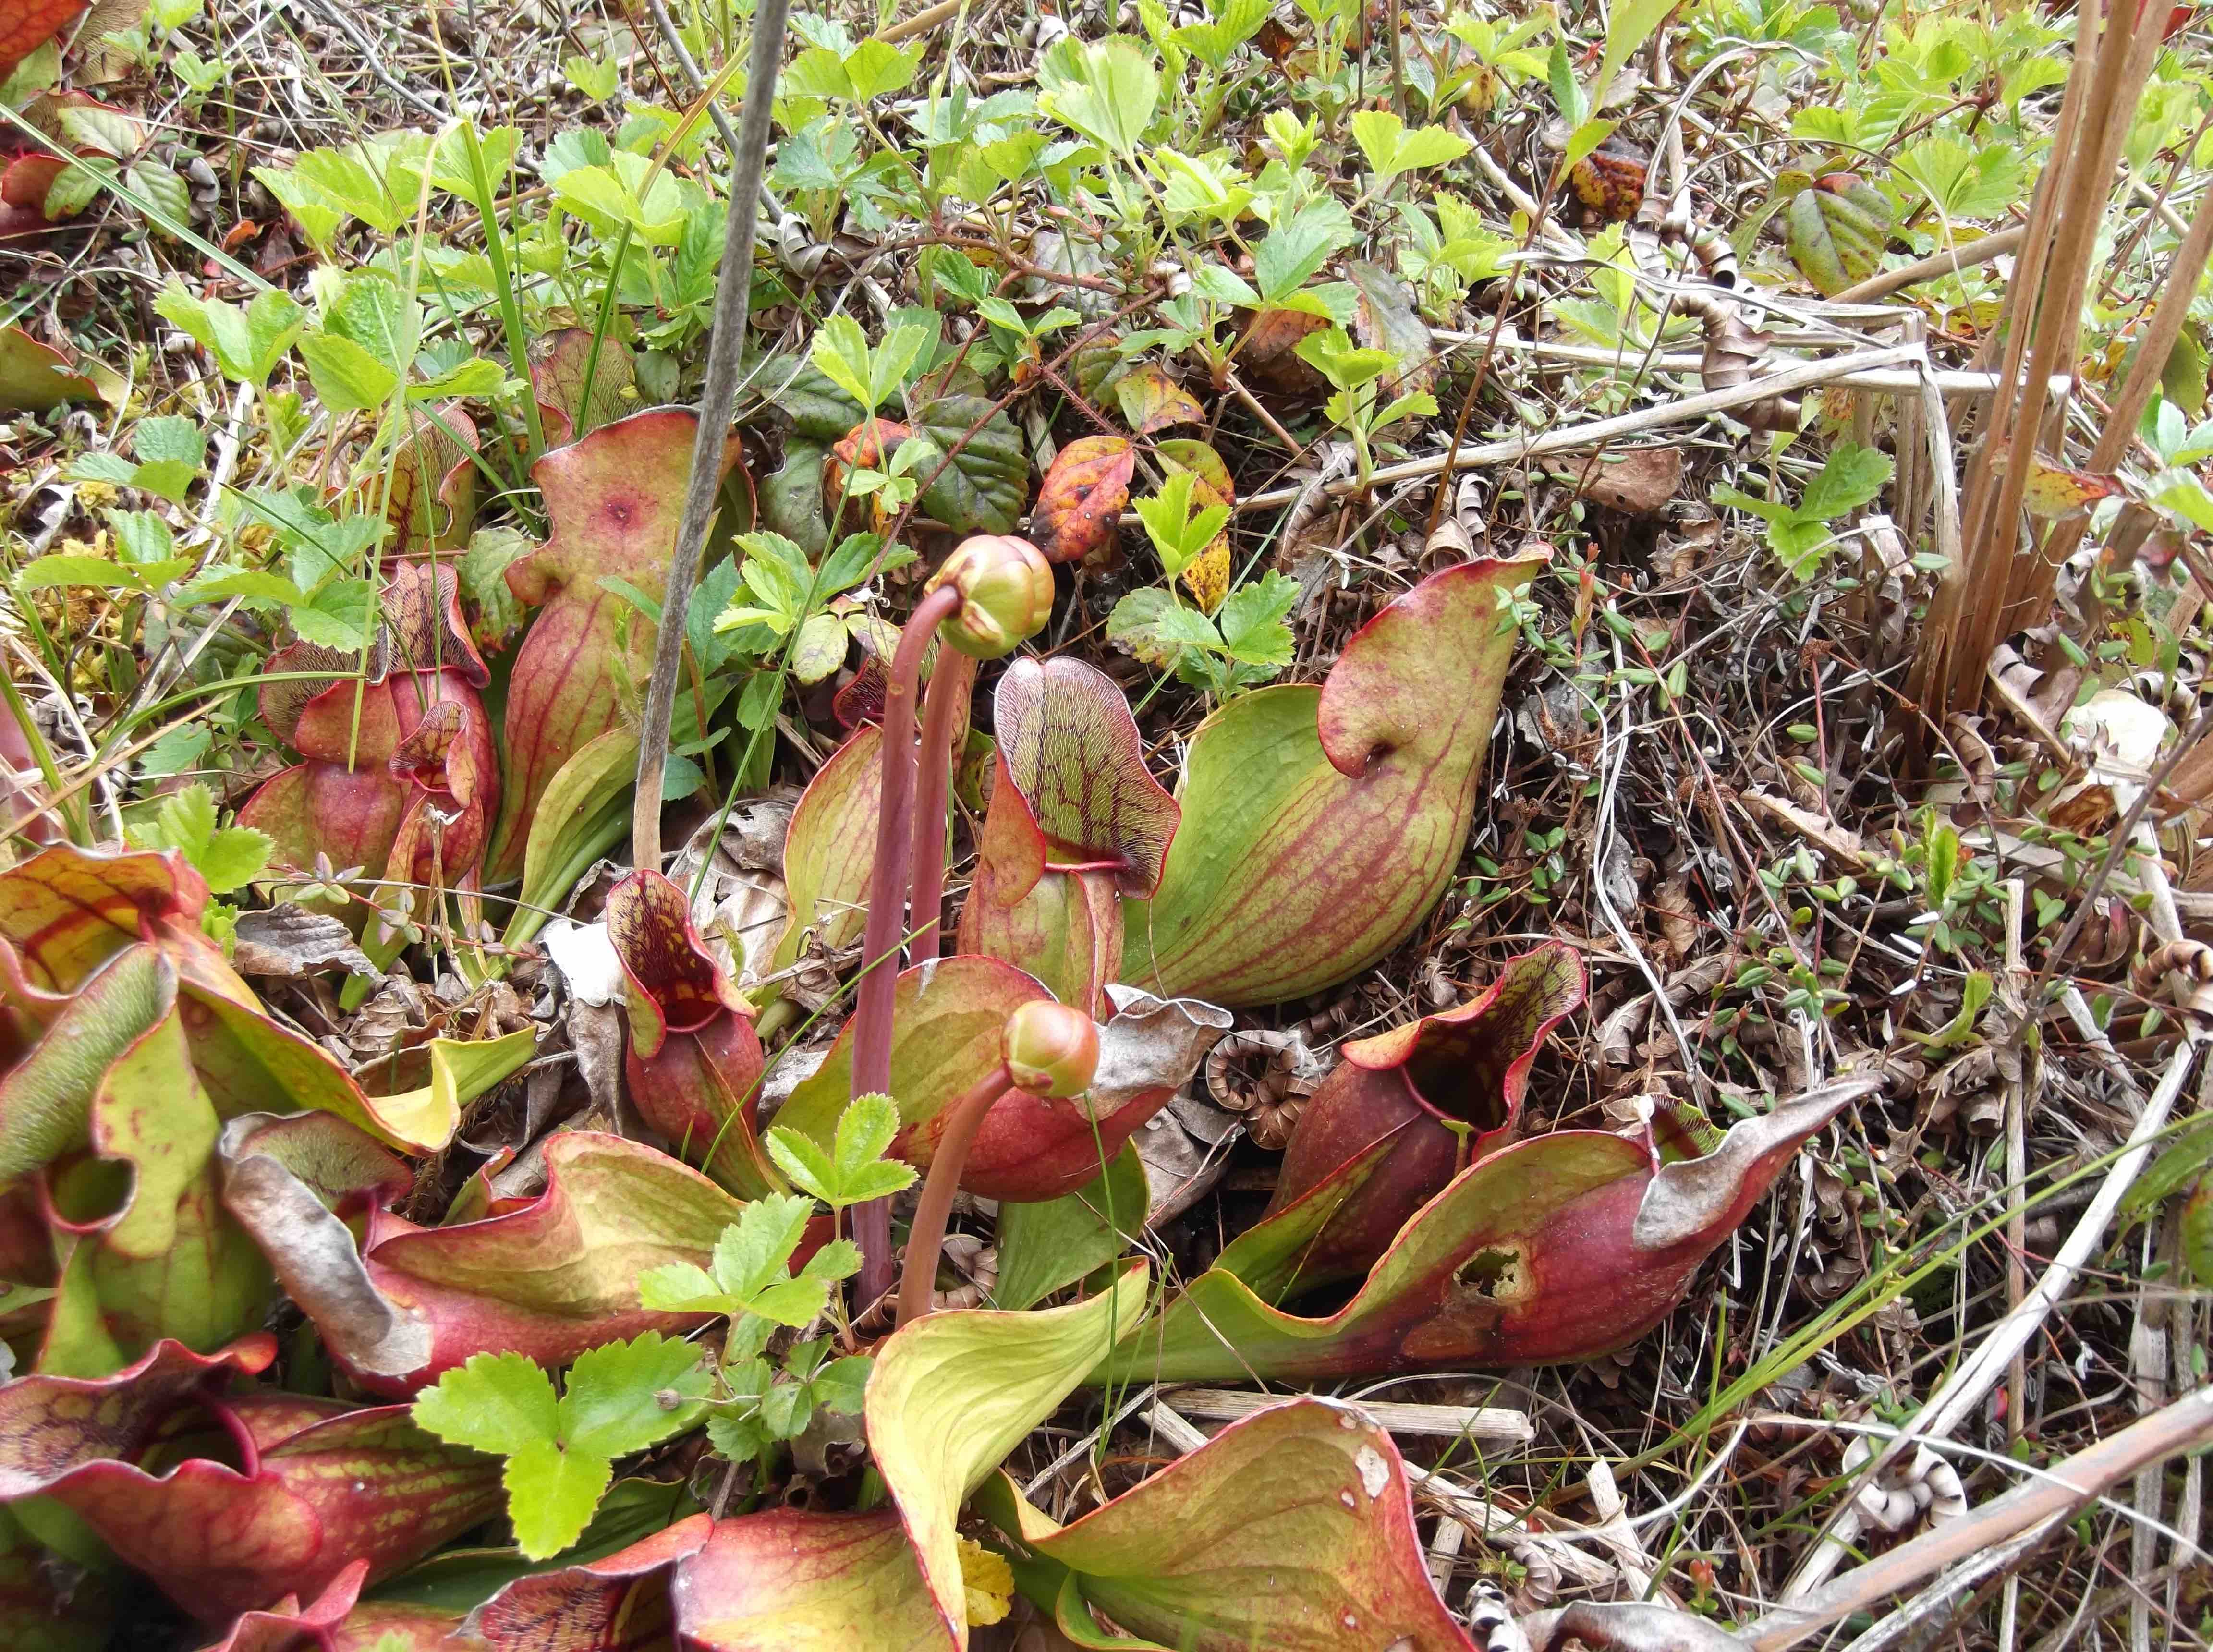 The Scientific Name is Sarracenia purpurea var. purpurea. You will likely hear them called Northern Purple Pitcherplant. This picture shows the The pitchers sprawl horizontally near the ground as verses the upright, vertical pitchers of other Sarracenia species. of Sarracenia purpurea var. purpurea